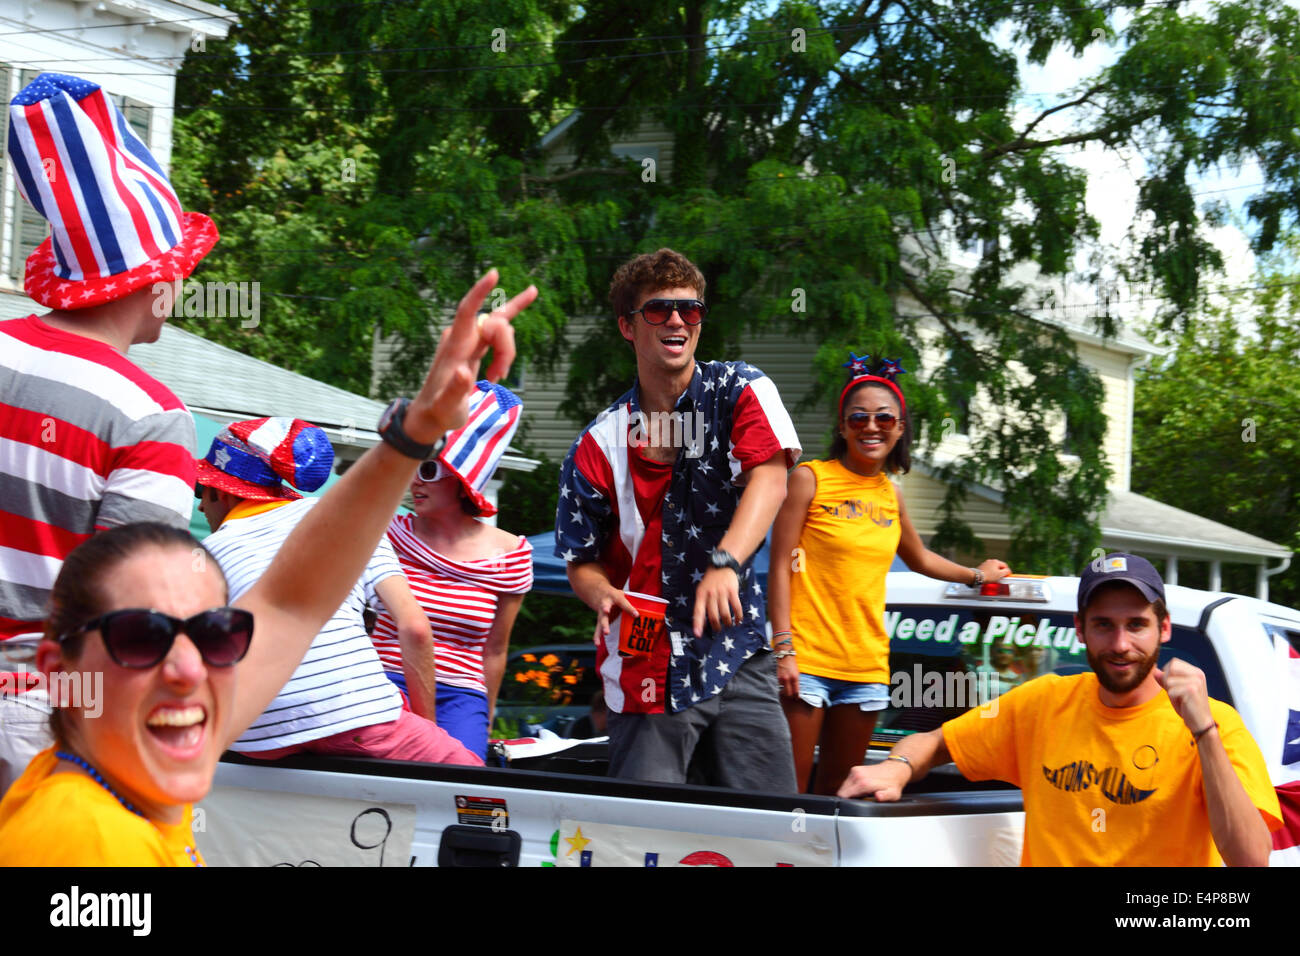 Young people in back of pick up truck celebrating 4th of July Independence Day parades, Catonsville, Maryland, USA Stock Photo